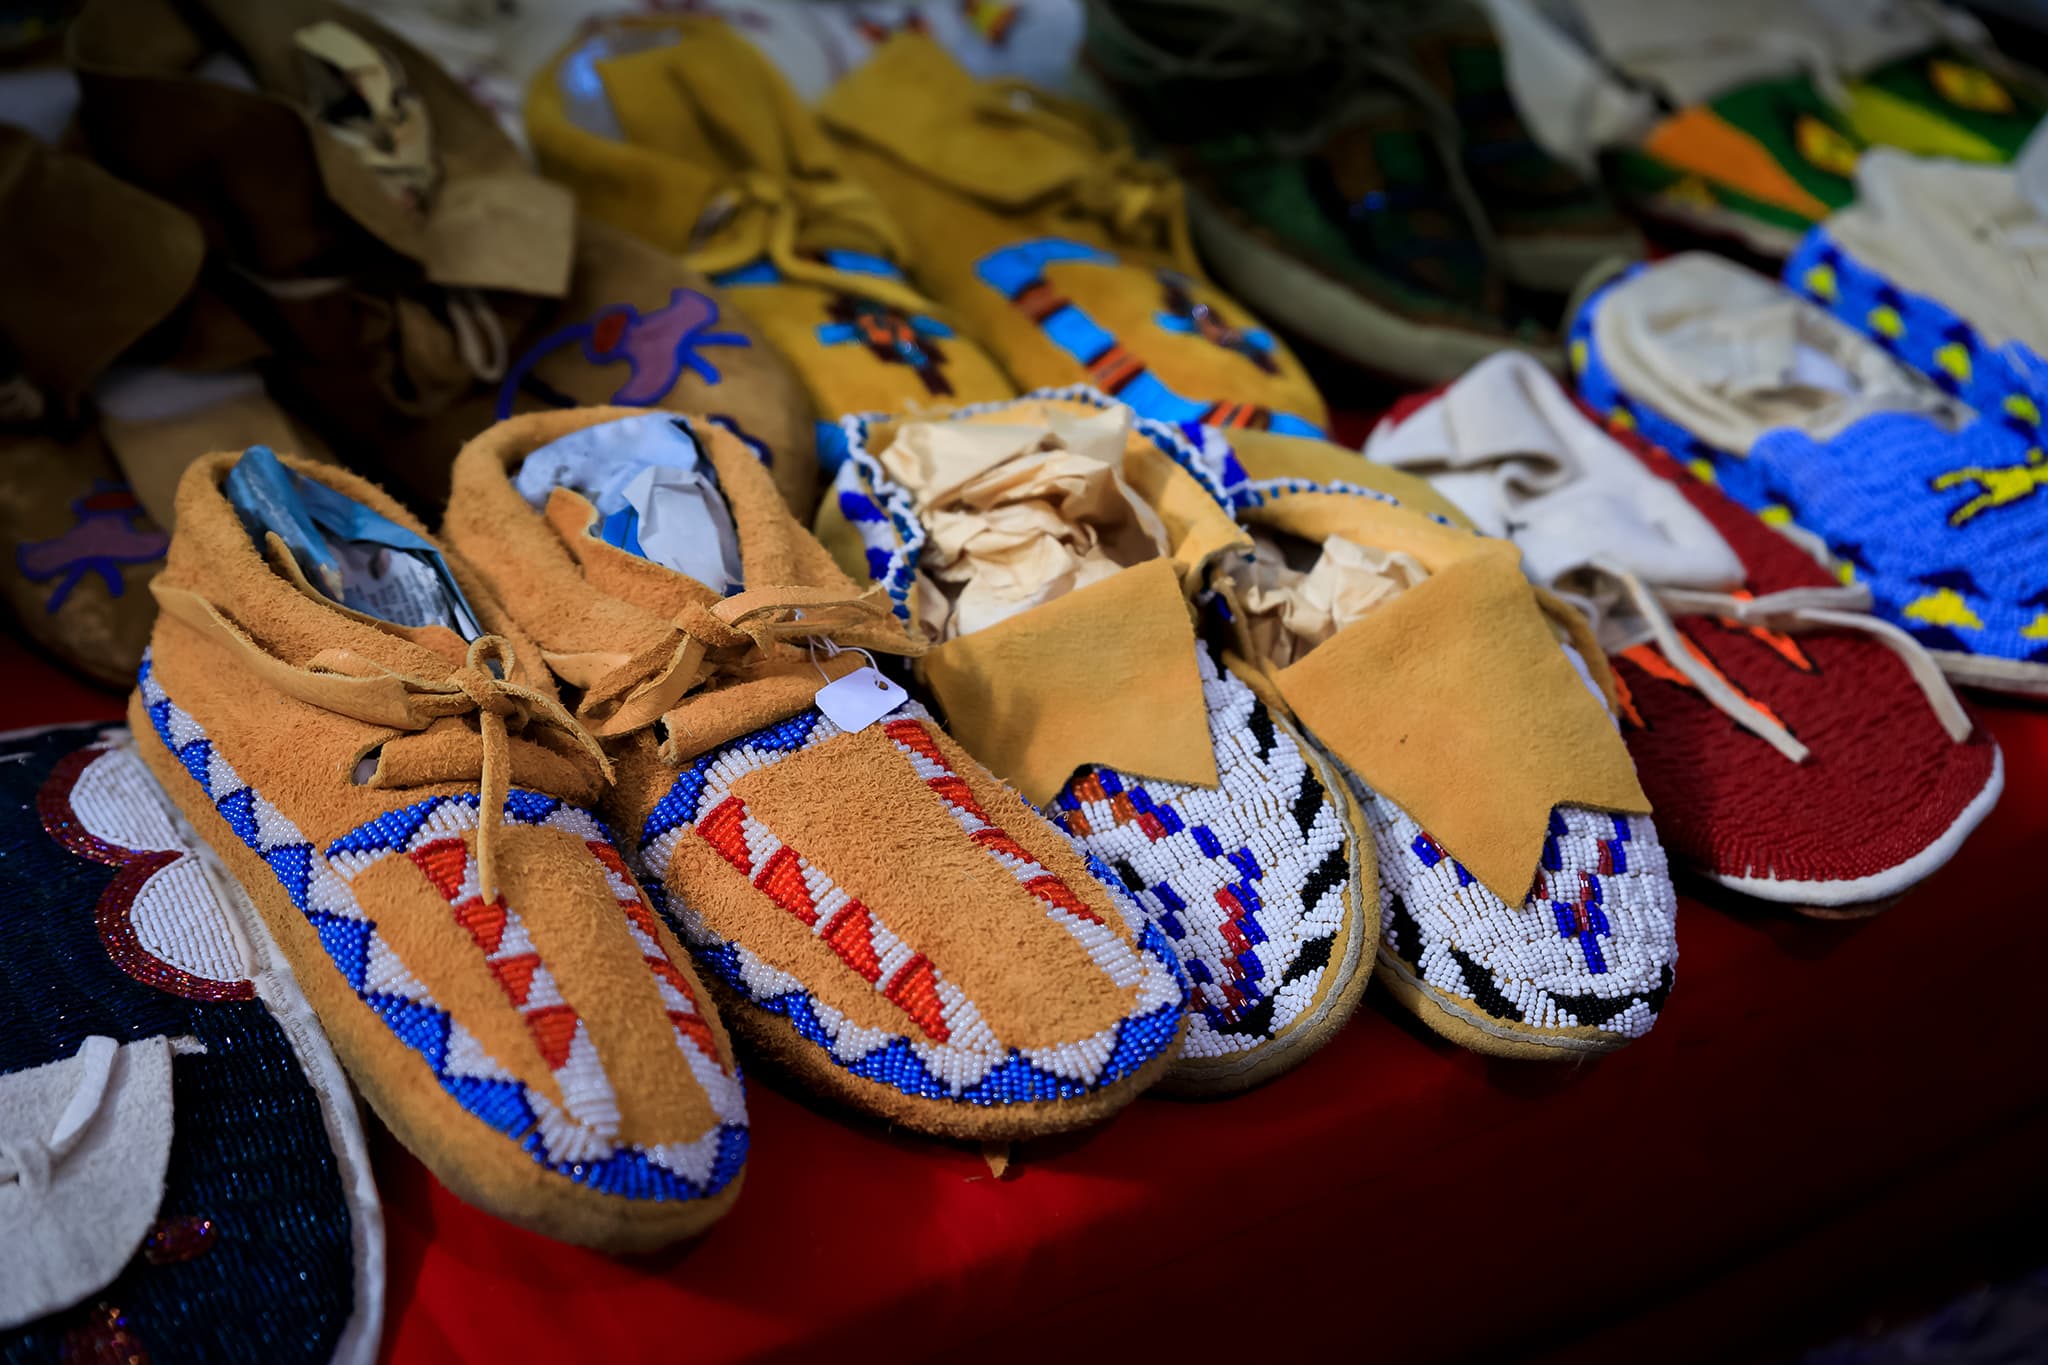 Moccasins were originally worn by native tribes, such as Native Americans